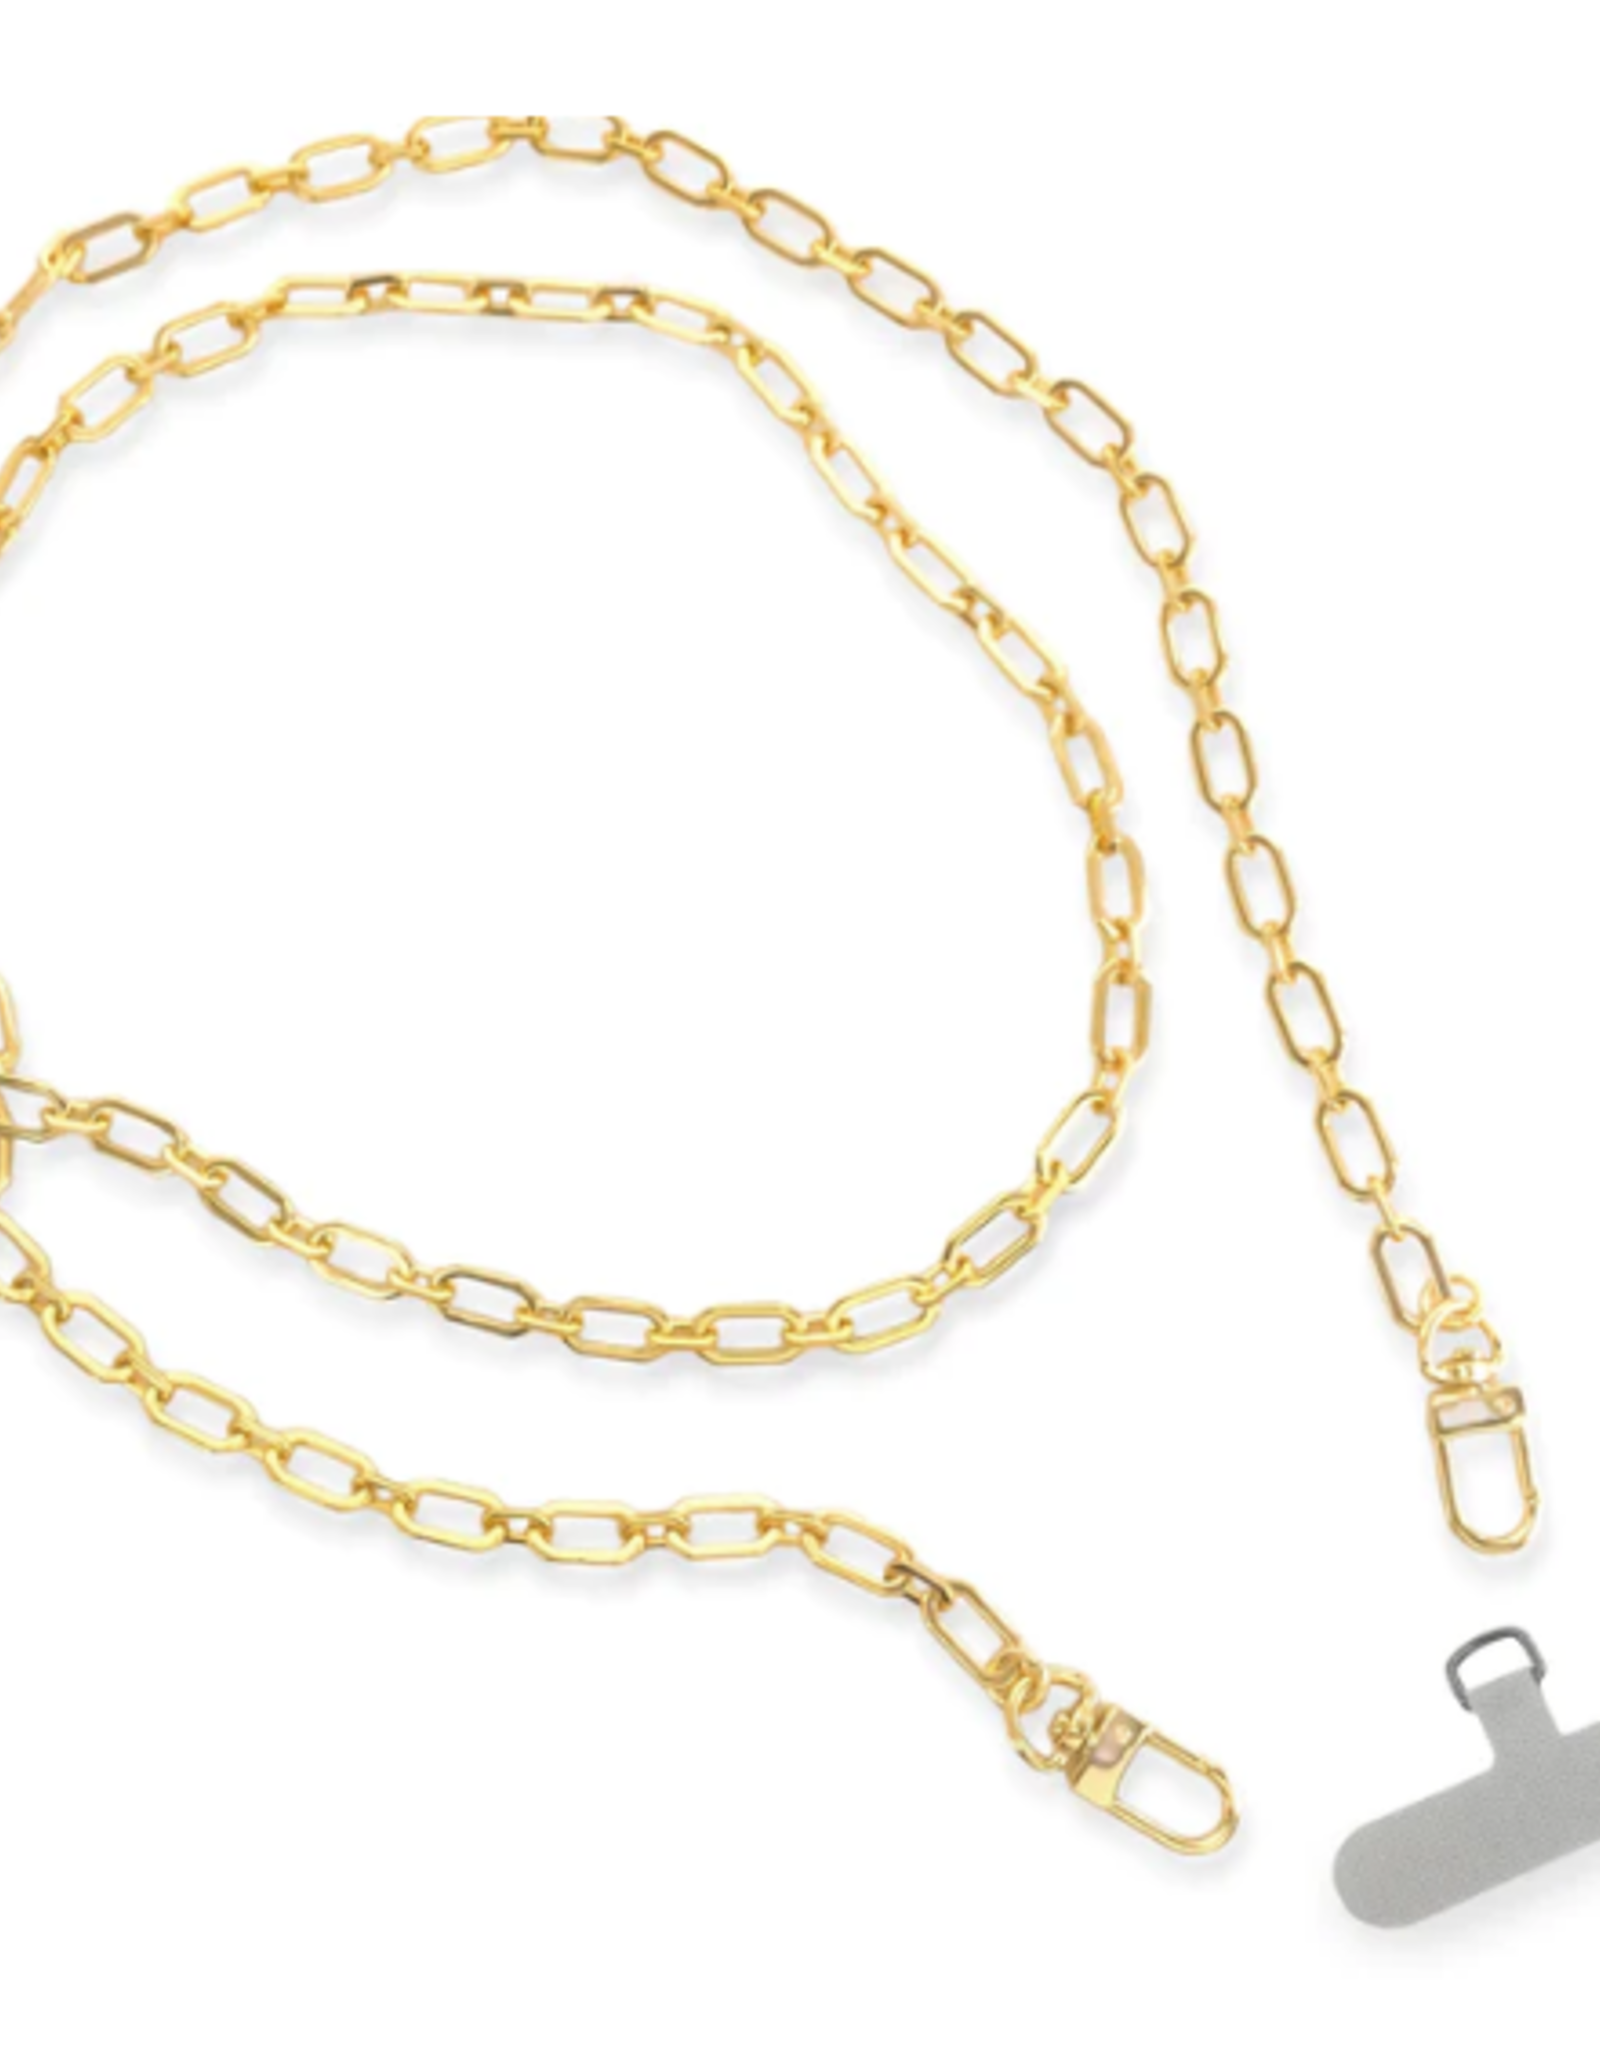 Gold Octagon Shaped Links Phone Chain